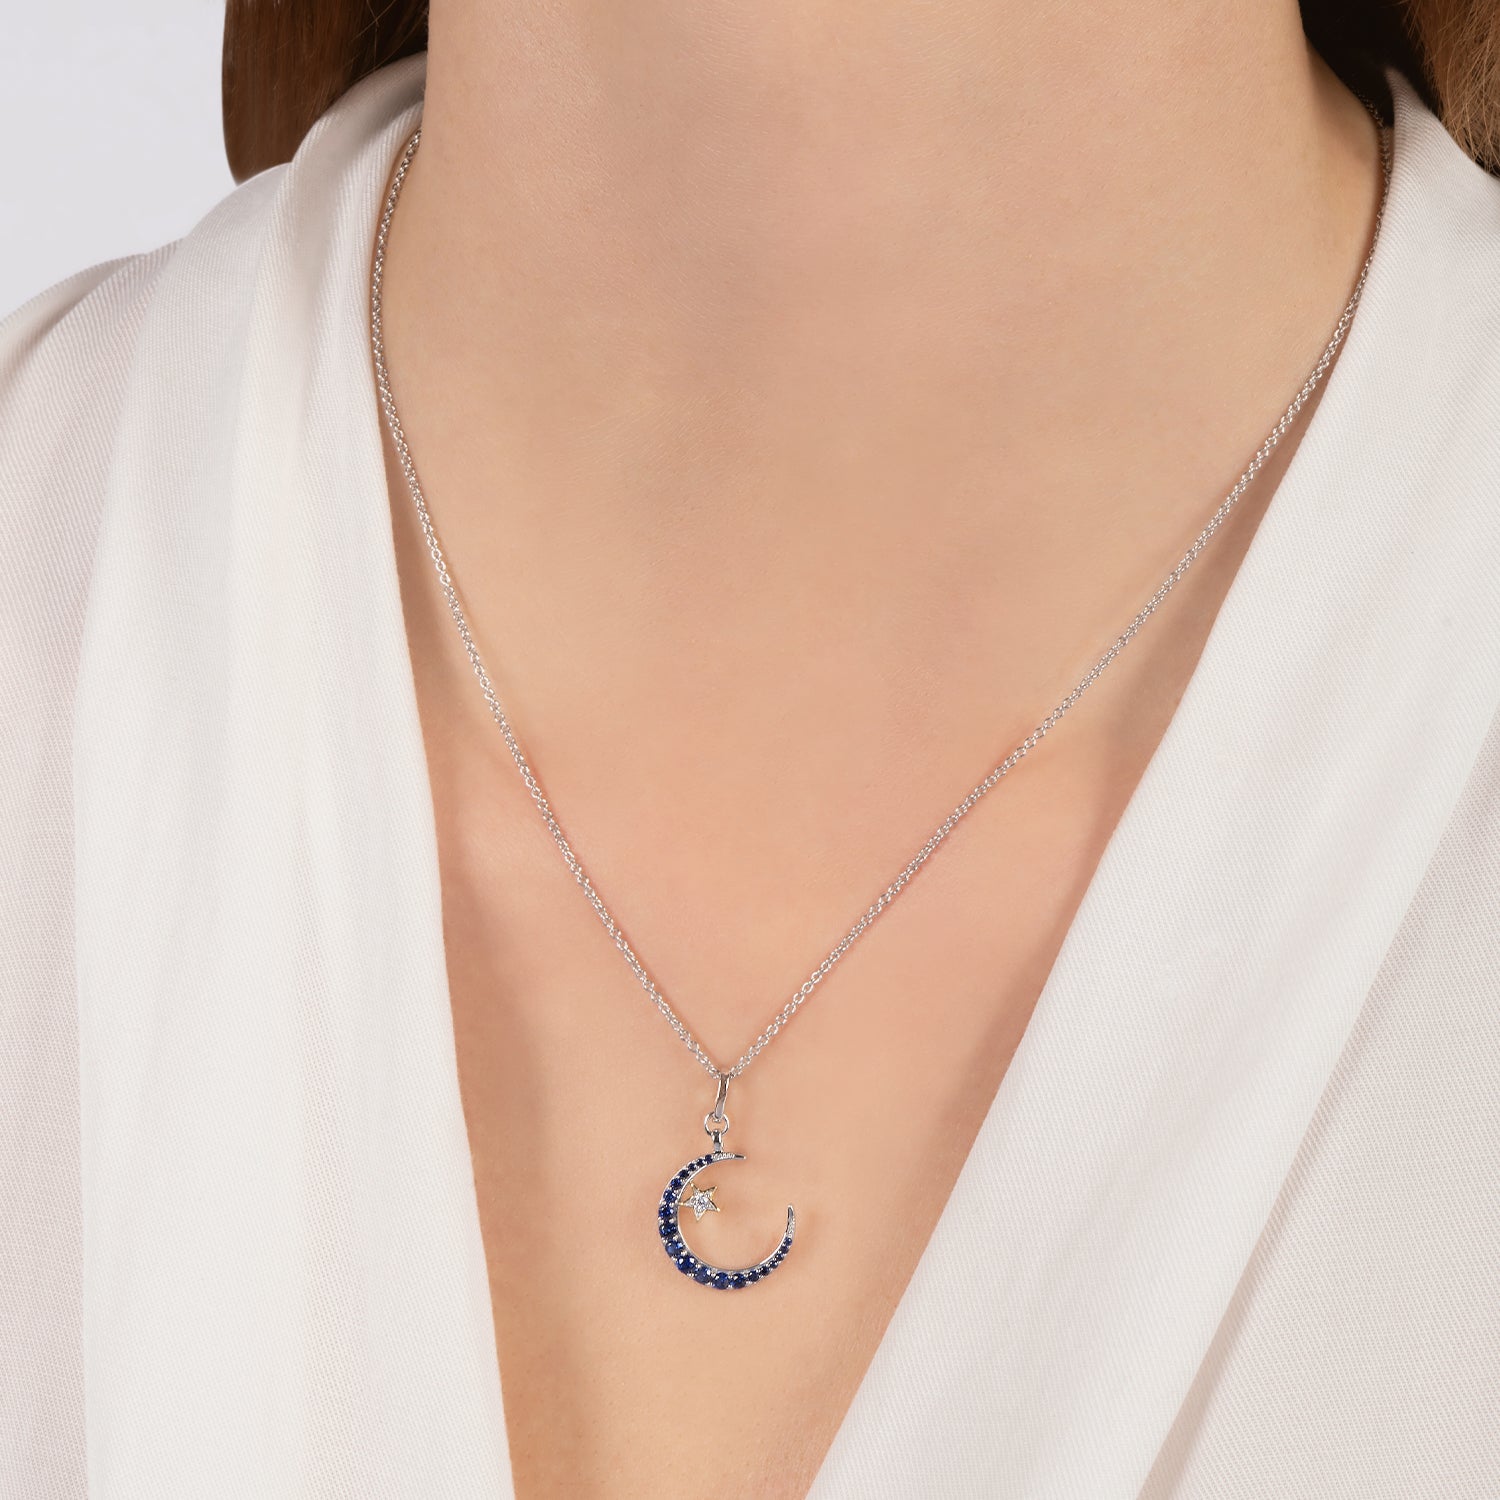 Paper Clip Necklace with raw blue Sapphire pendant – Artiby.com